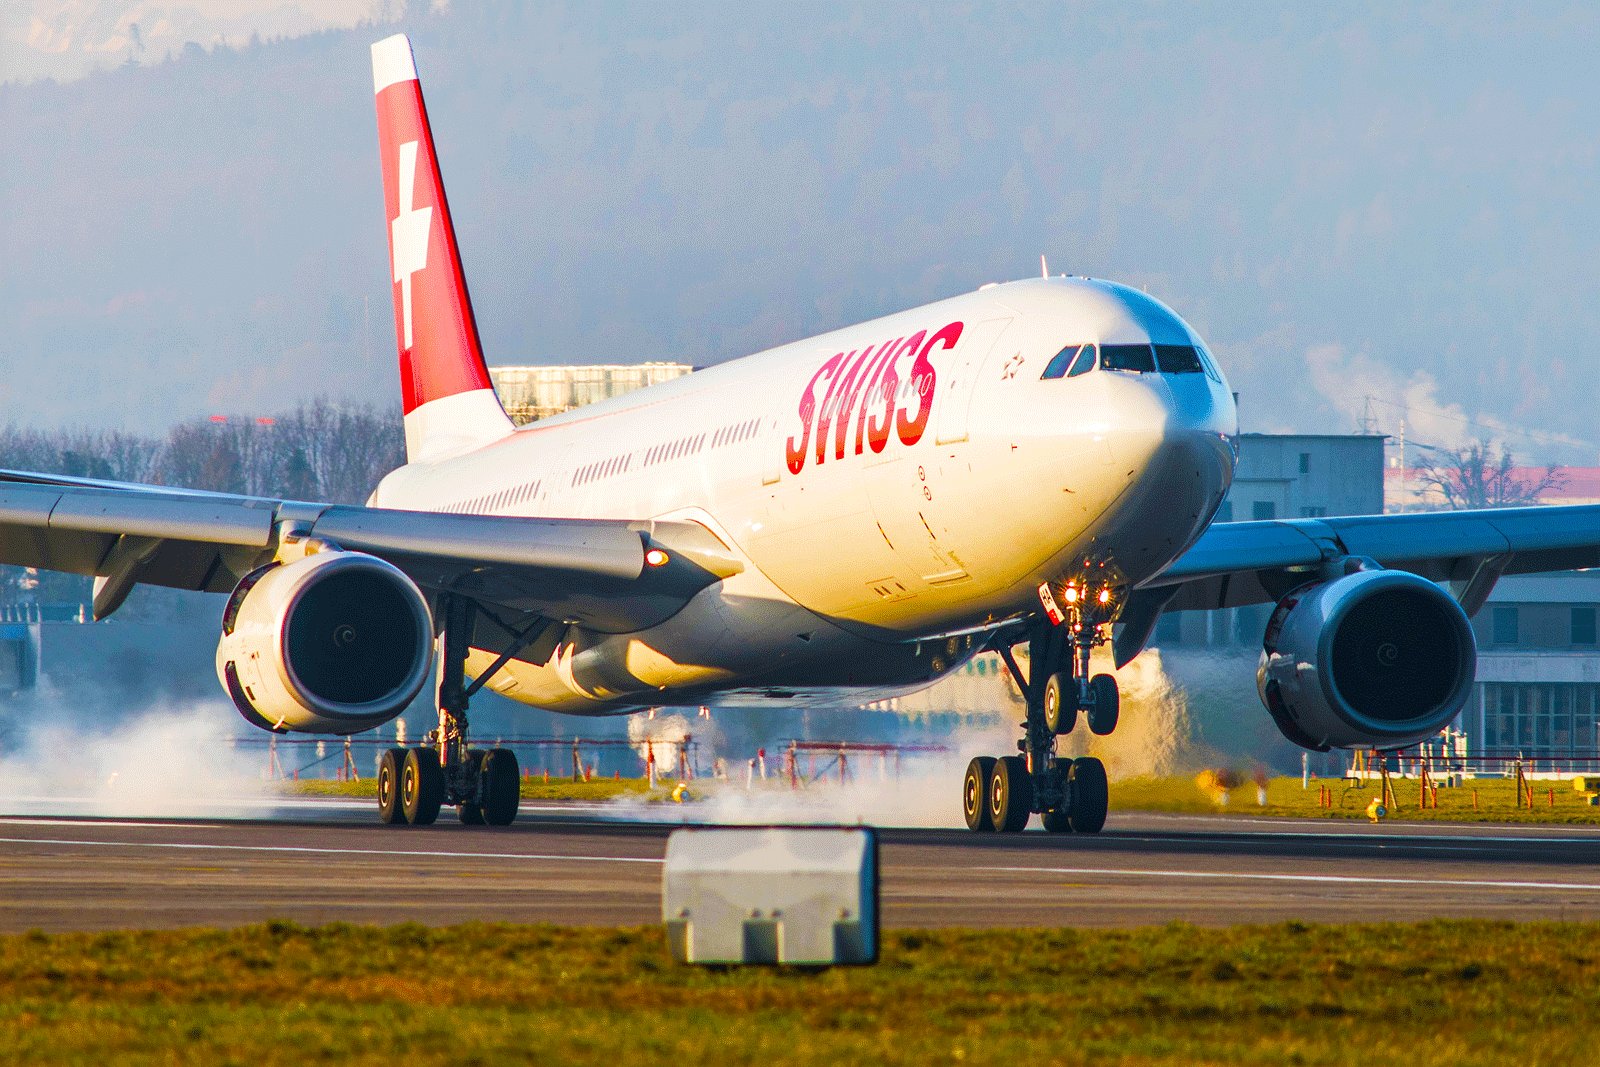 How to see plane landing close up in Zurich